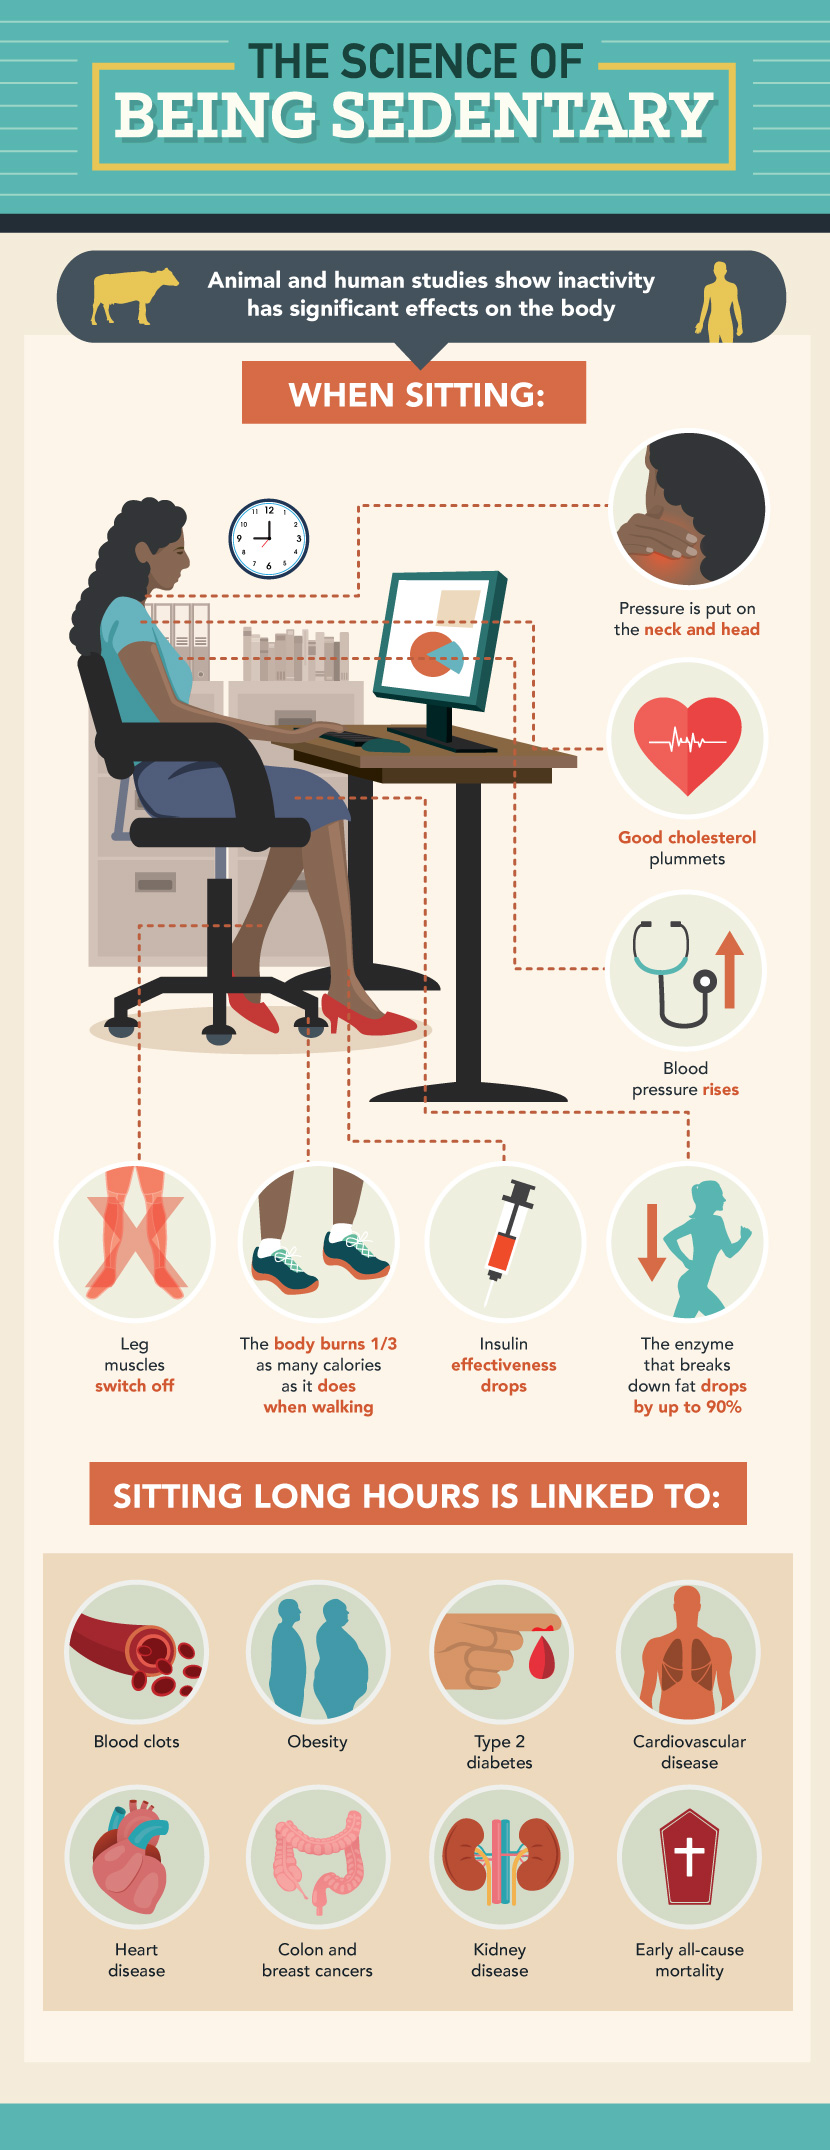 Make a Move: The Science of Being Sedentary